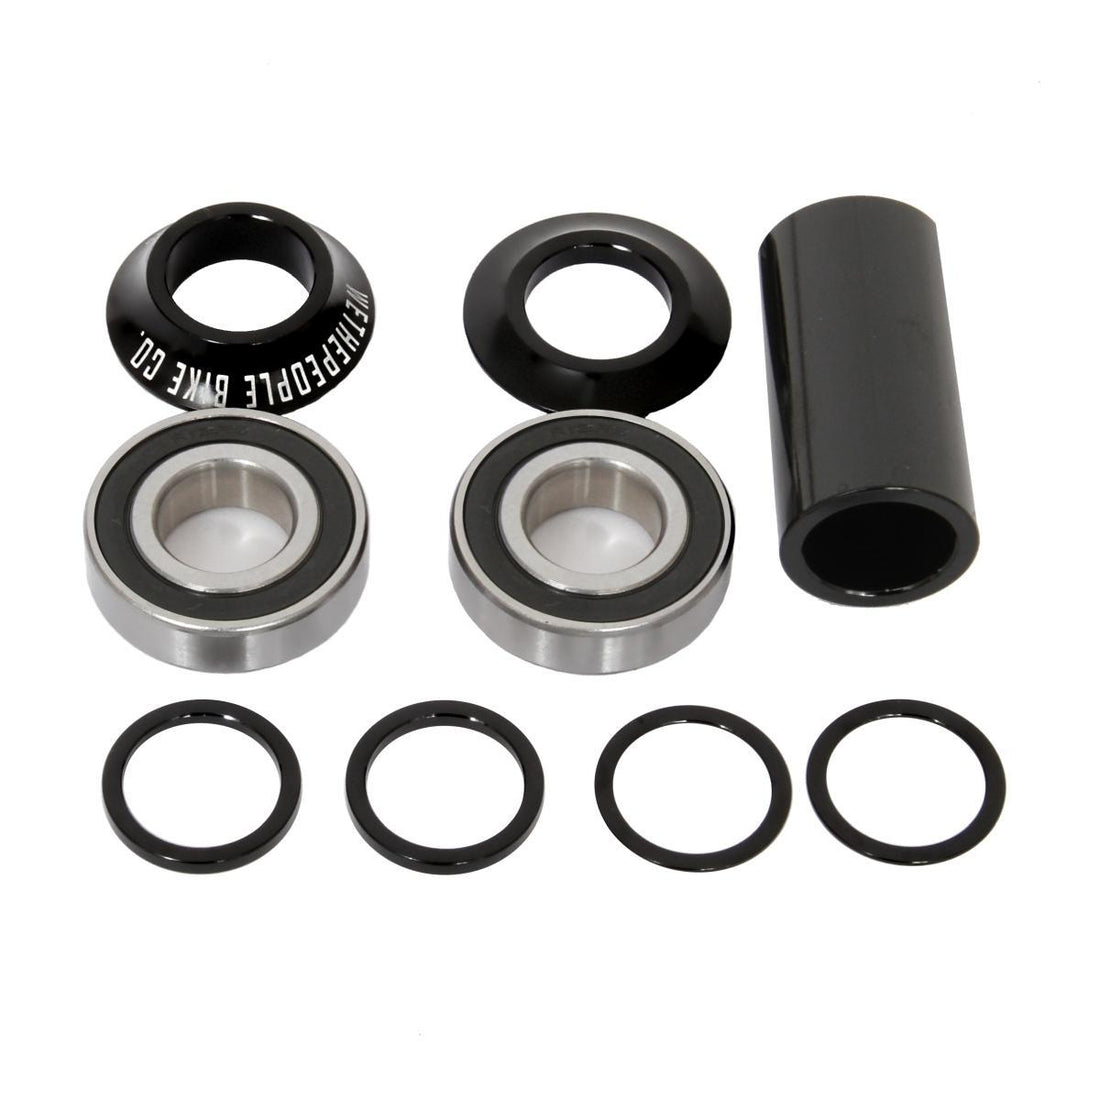 WeThePeople Compact Bottom Bracket at 26.99. Quality Bottom Brackets from Waller BMX.